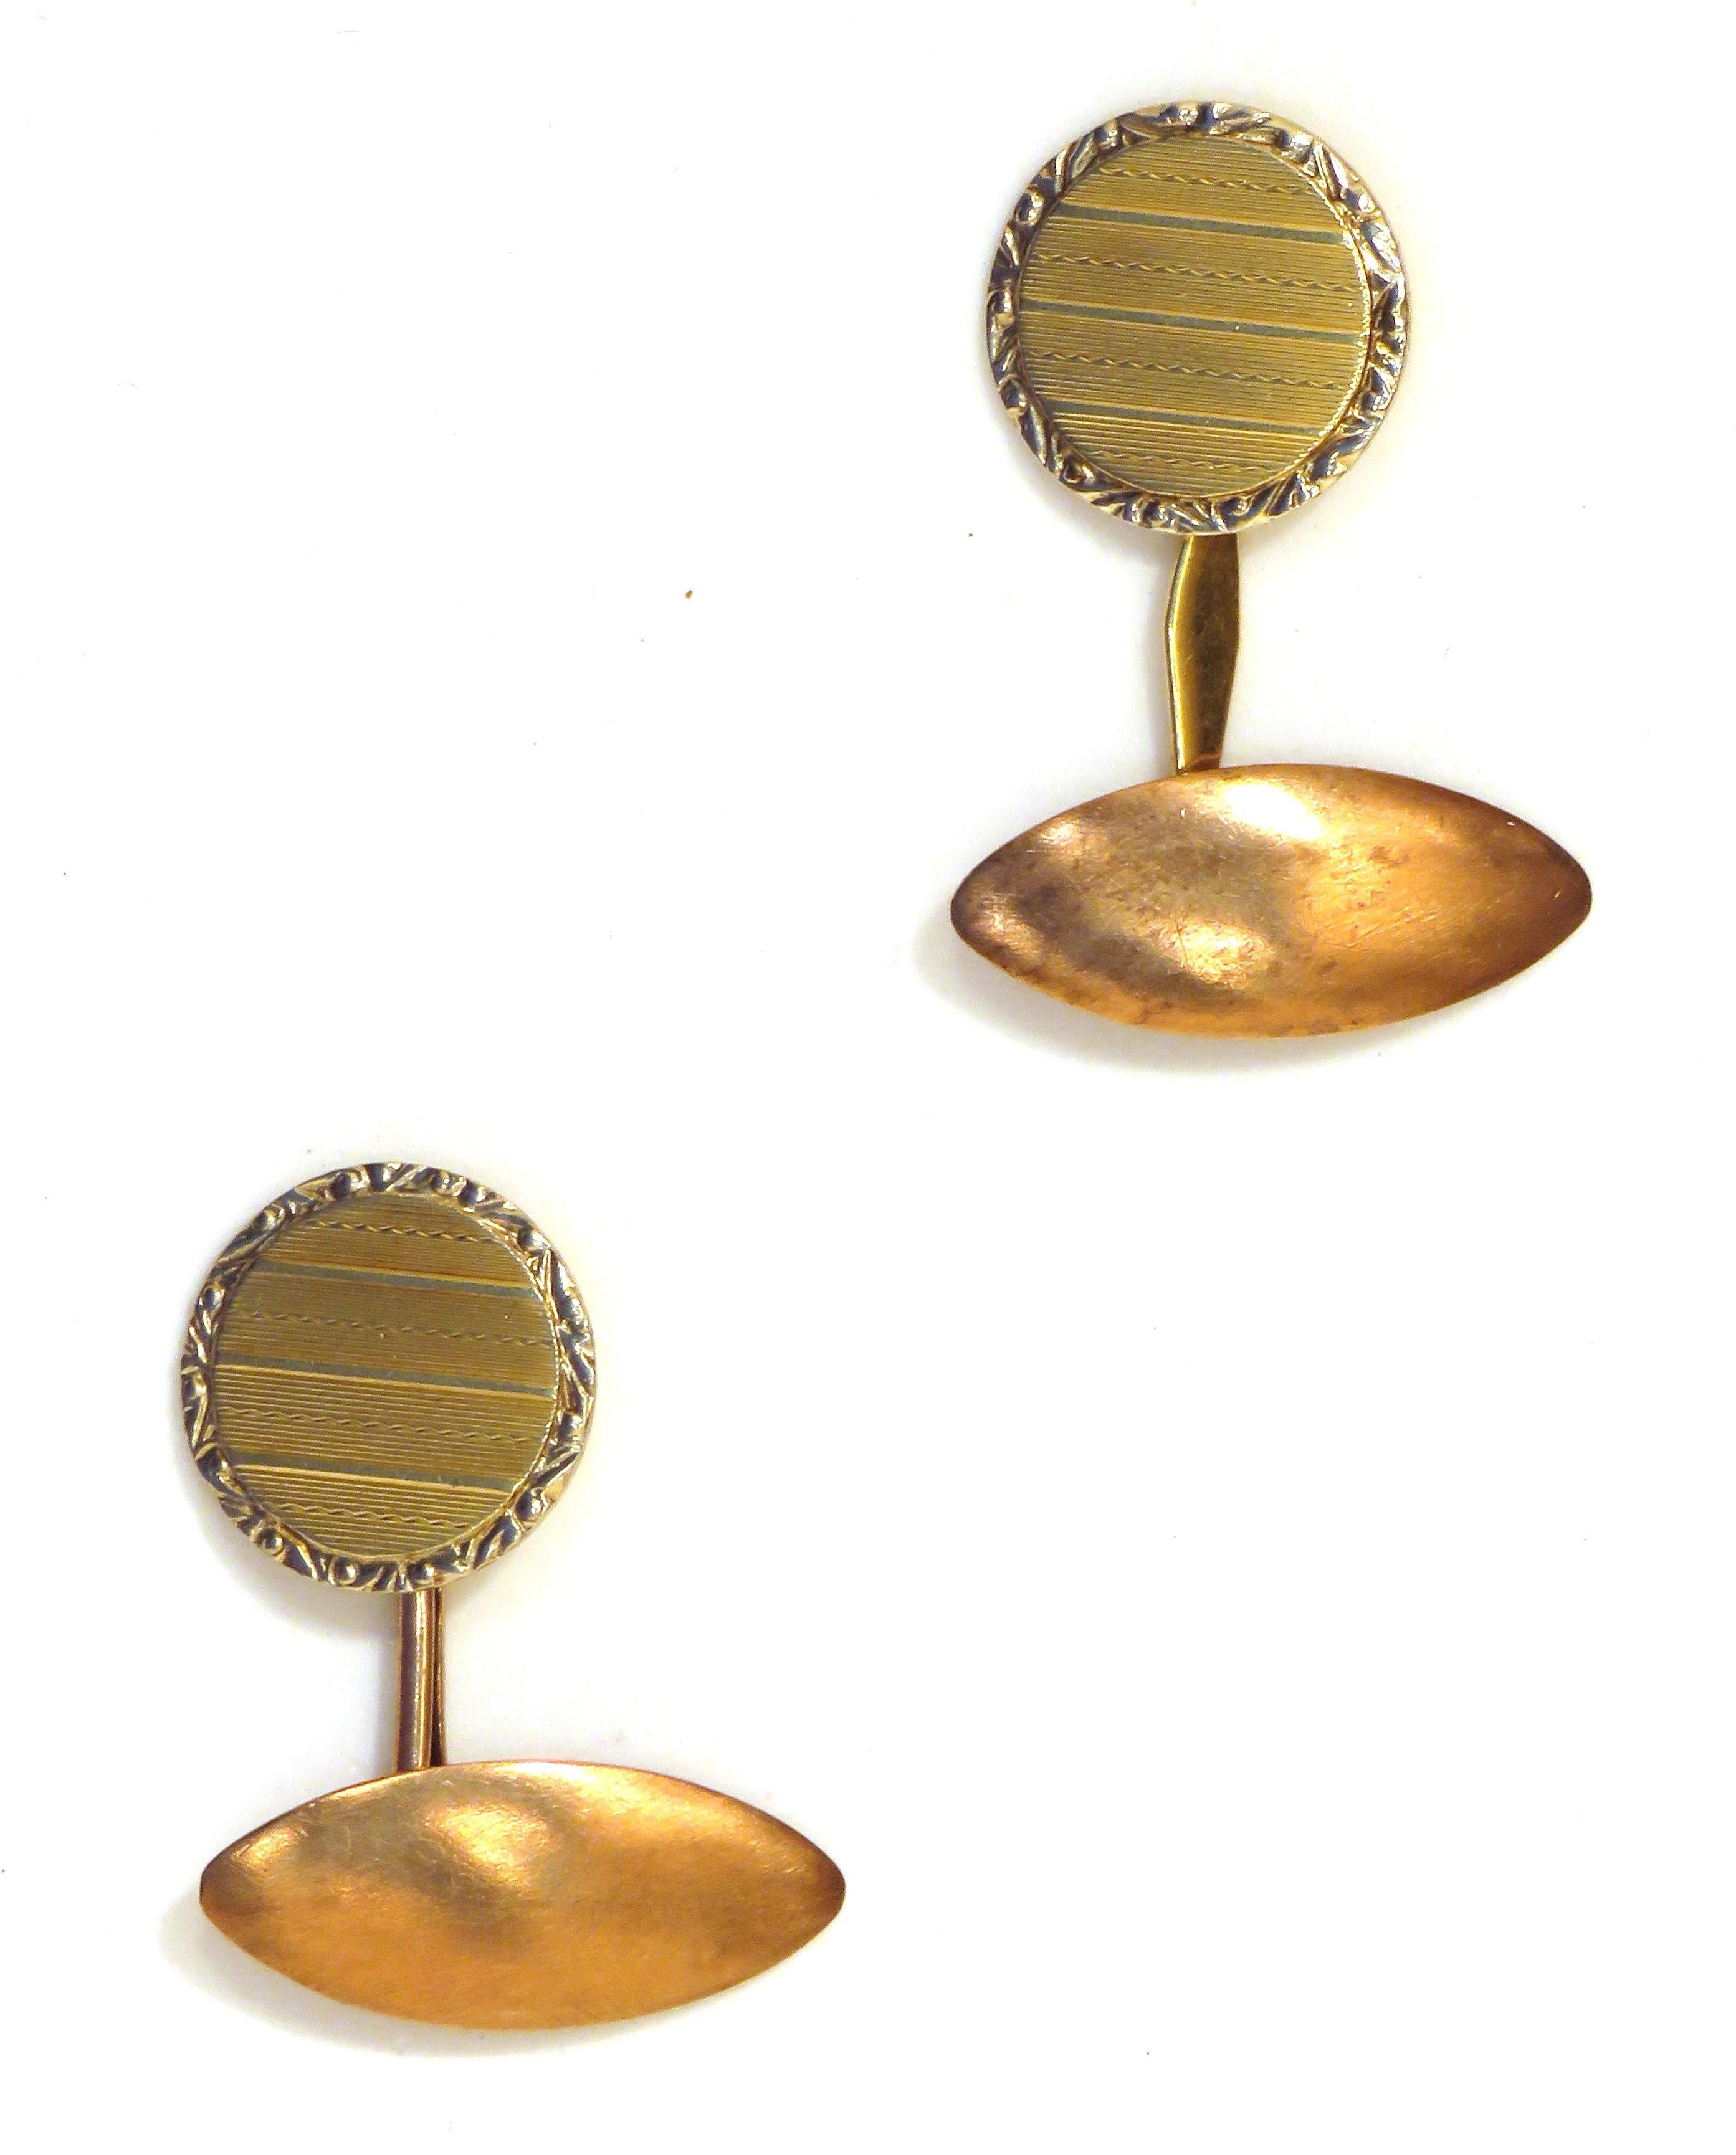 Engraved cufflinks handcrafted in 18k rose/white/yellow gold with oval bar length 18x8 millimeters / 0.708x0.314 inches and round bar 12 millimeters / 0.472 inches